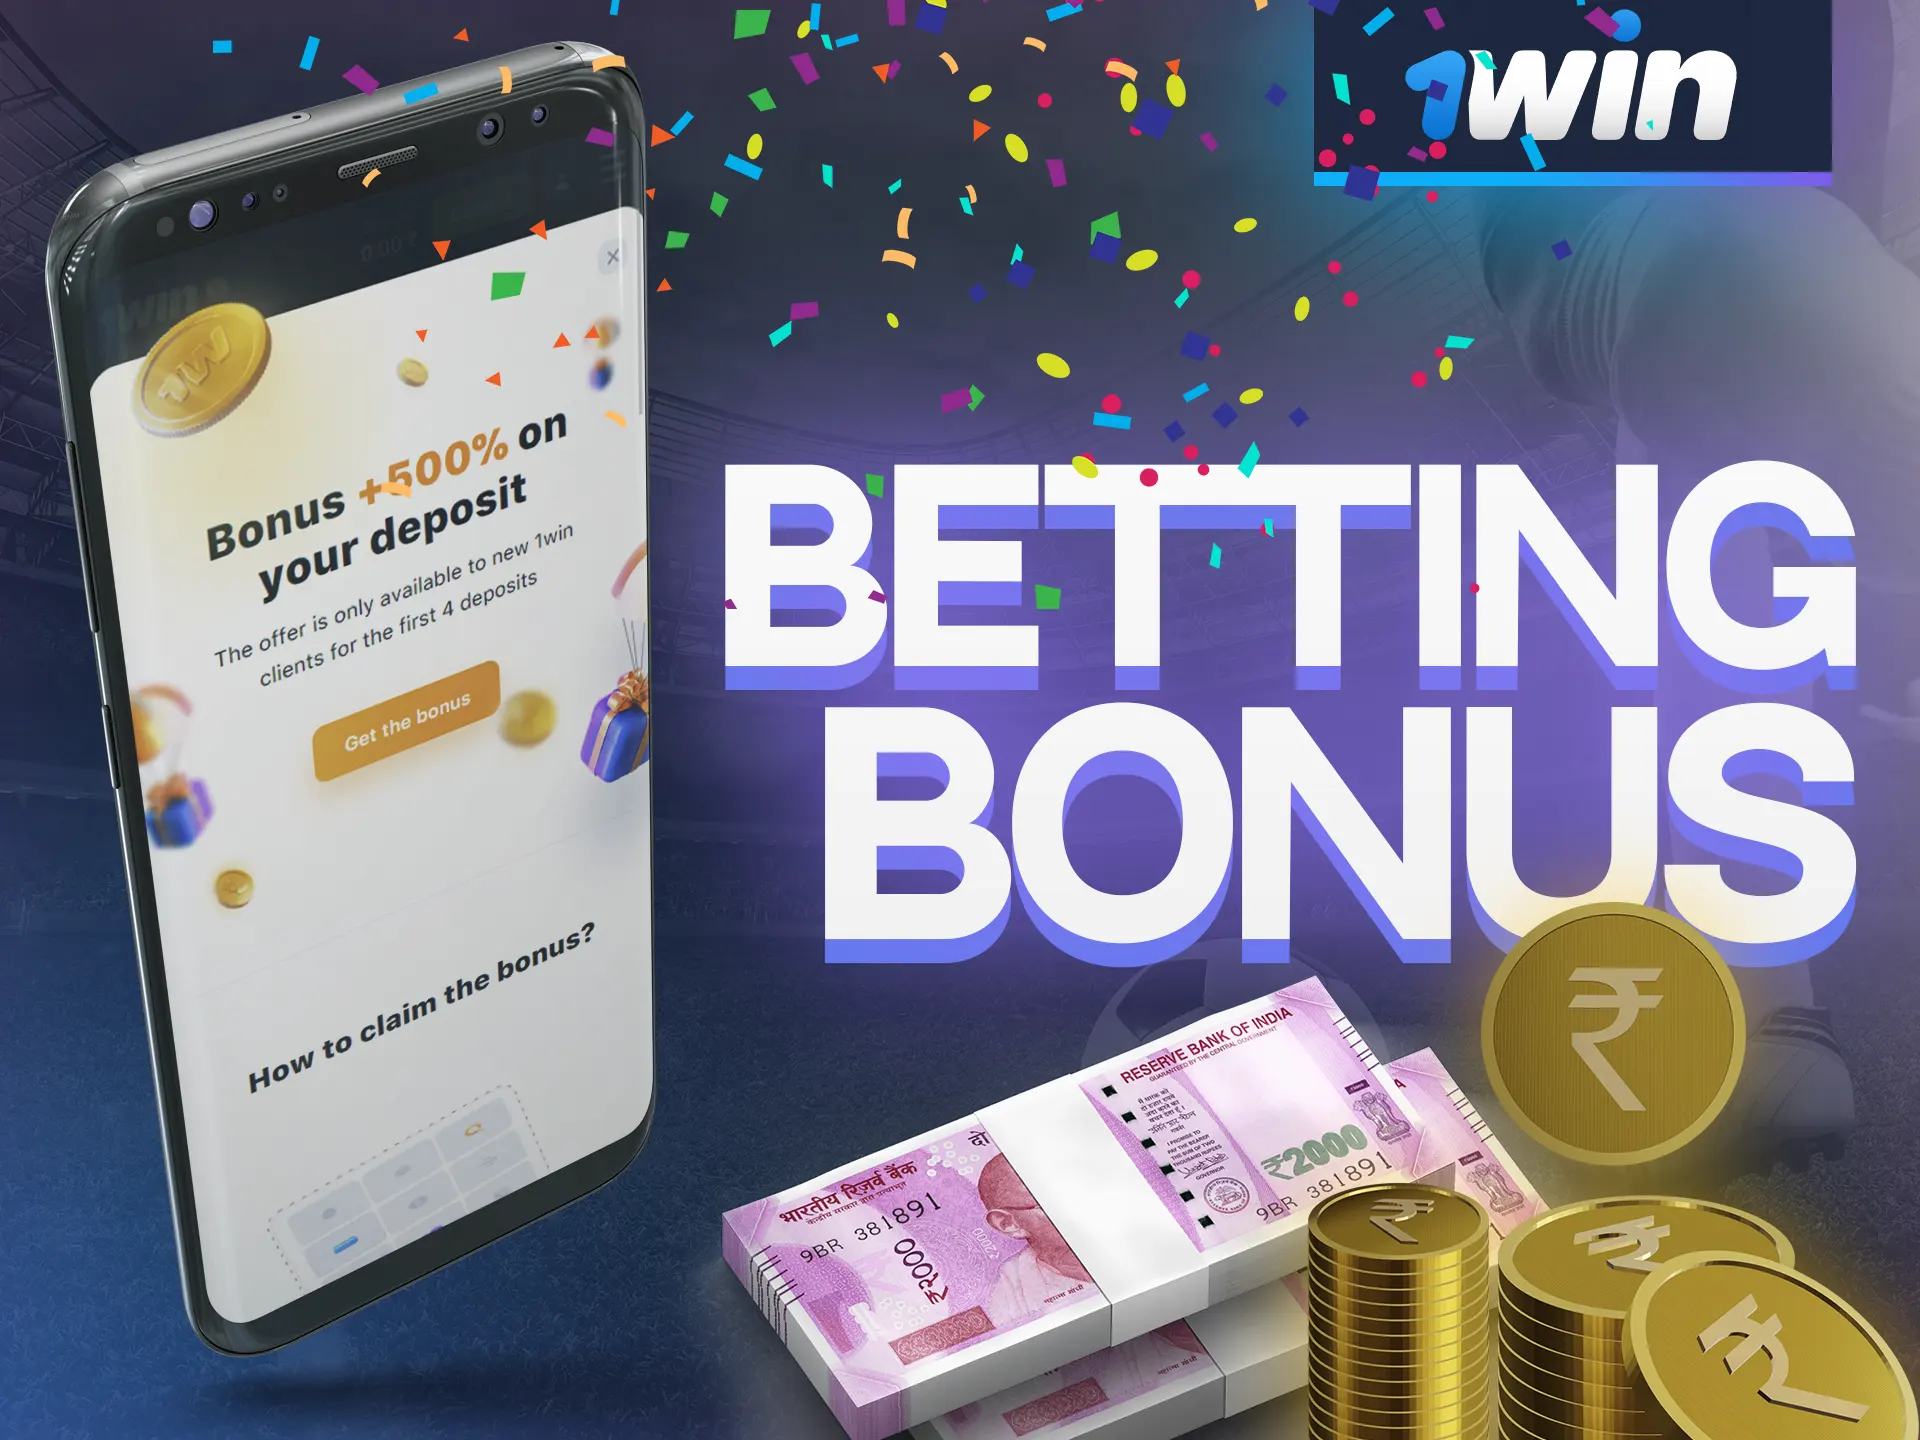 In the 1Win app, get and use an incredibly profitable sports betting bonus.